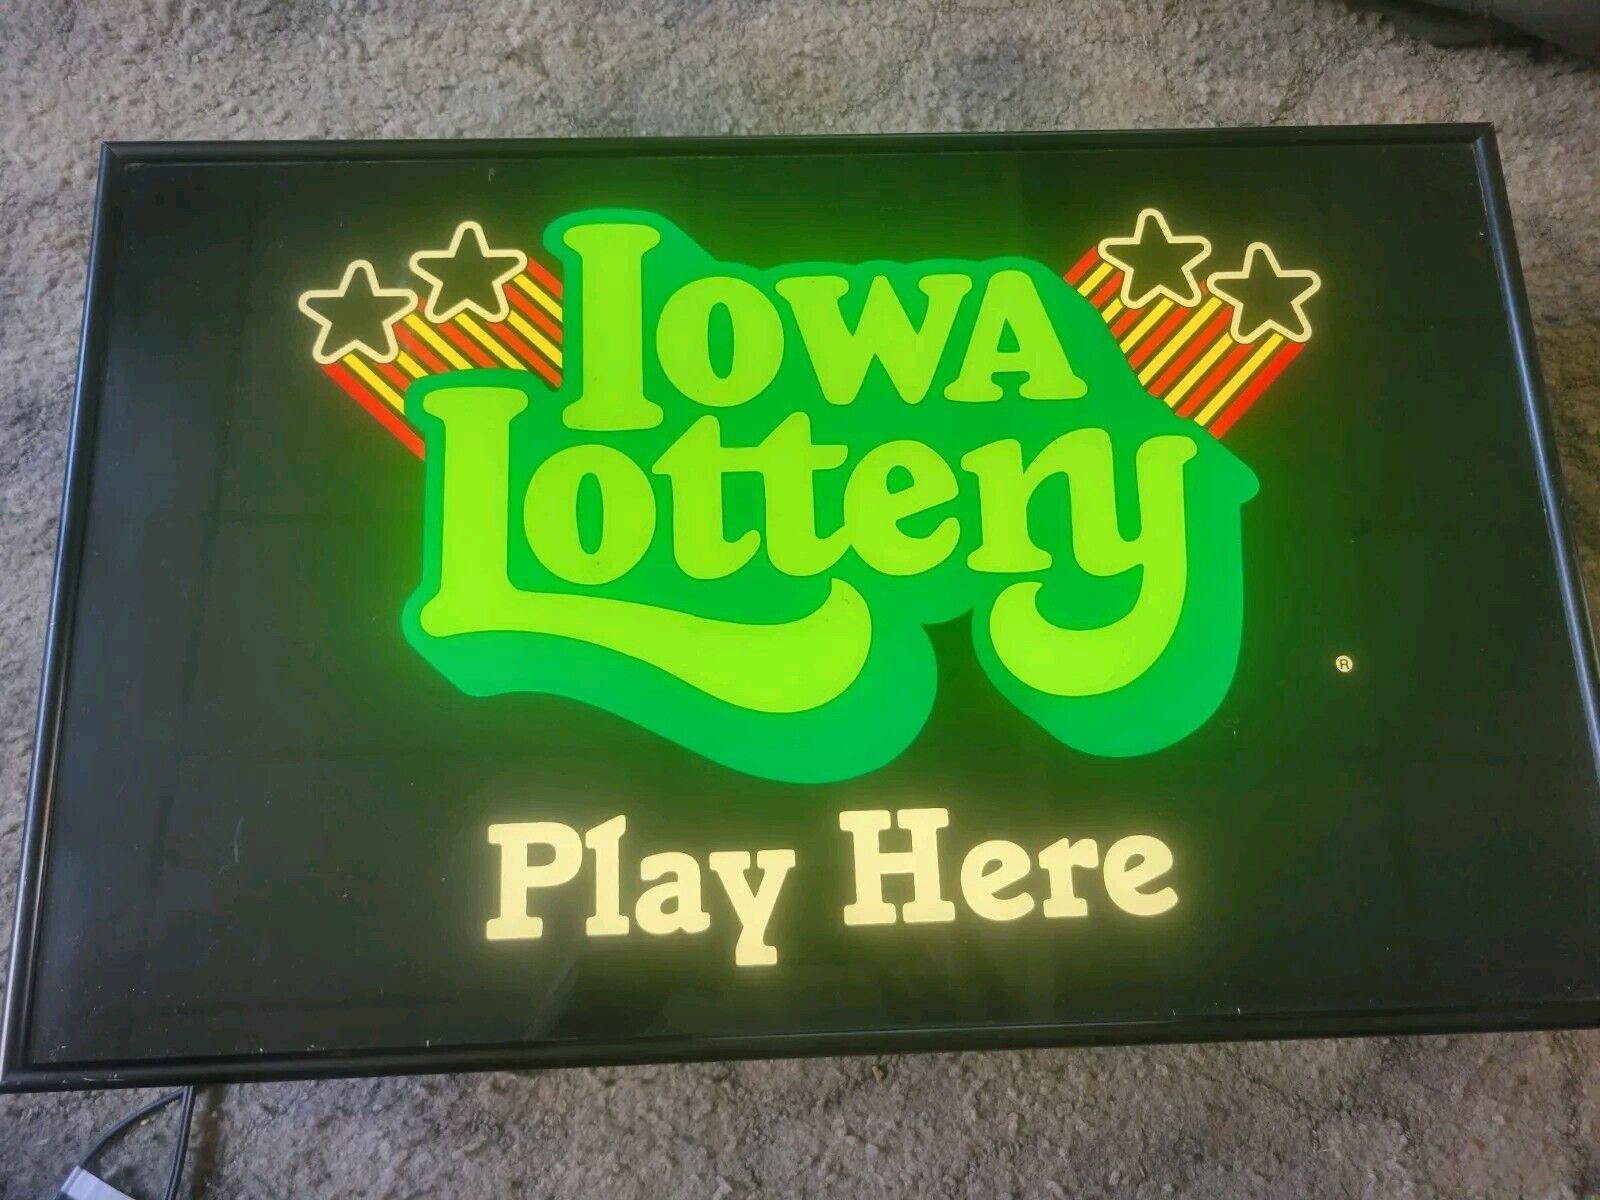 Rare Vintage IOWA Lottery Lighted Advertising Sign.  Works